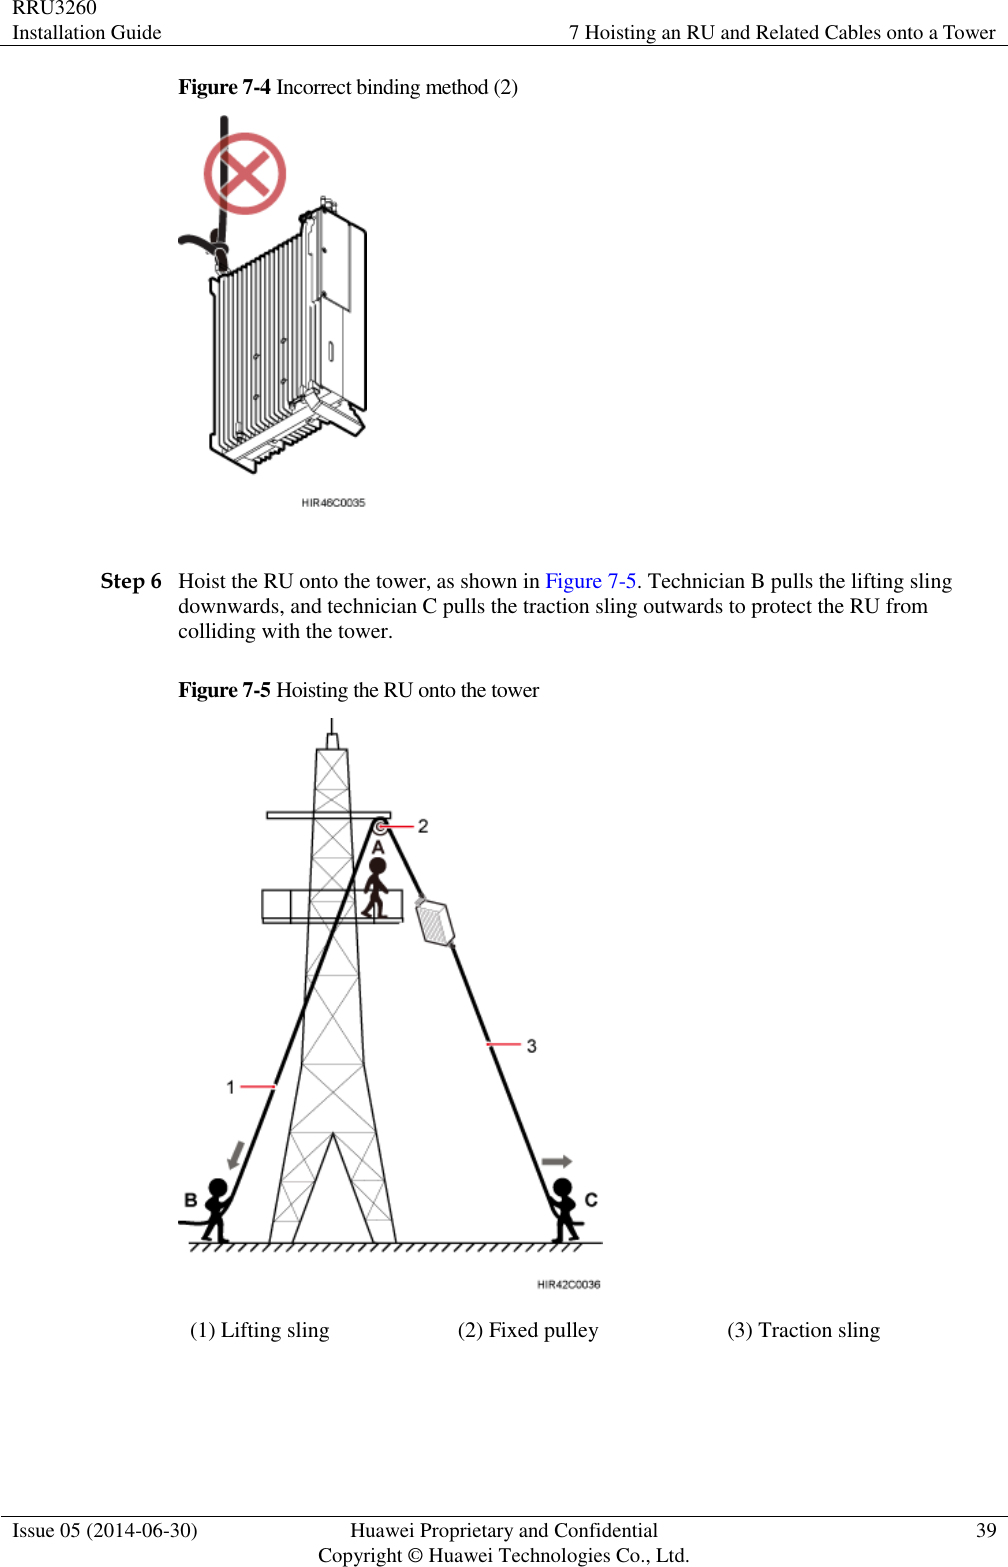 RRU3260 Installation Guide 7 Hoisting an RU and Related Cables onto a Tower  Issue 05 (2014-06-30) Huawei Proprietary and Confidential                                     Copyright © Huawei Technologies Co., Ltd. 39  Figure 7-4 Incorrect binding method (2)   Step 6 Hoist the RU onto the tower, as shown in Figure 7-5. Technician B pulls the lifting sling downwards, and technician C pulls the traction sling outwards to protect the RU from colliding with the tower. Figure 7-5 Hoisting the RU onto the tower  (1) Lifting sling (2) Fixed pulley (3) Traction sling   